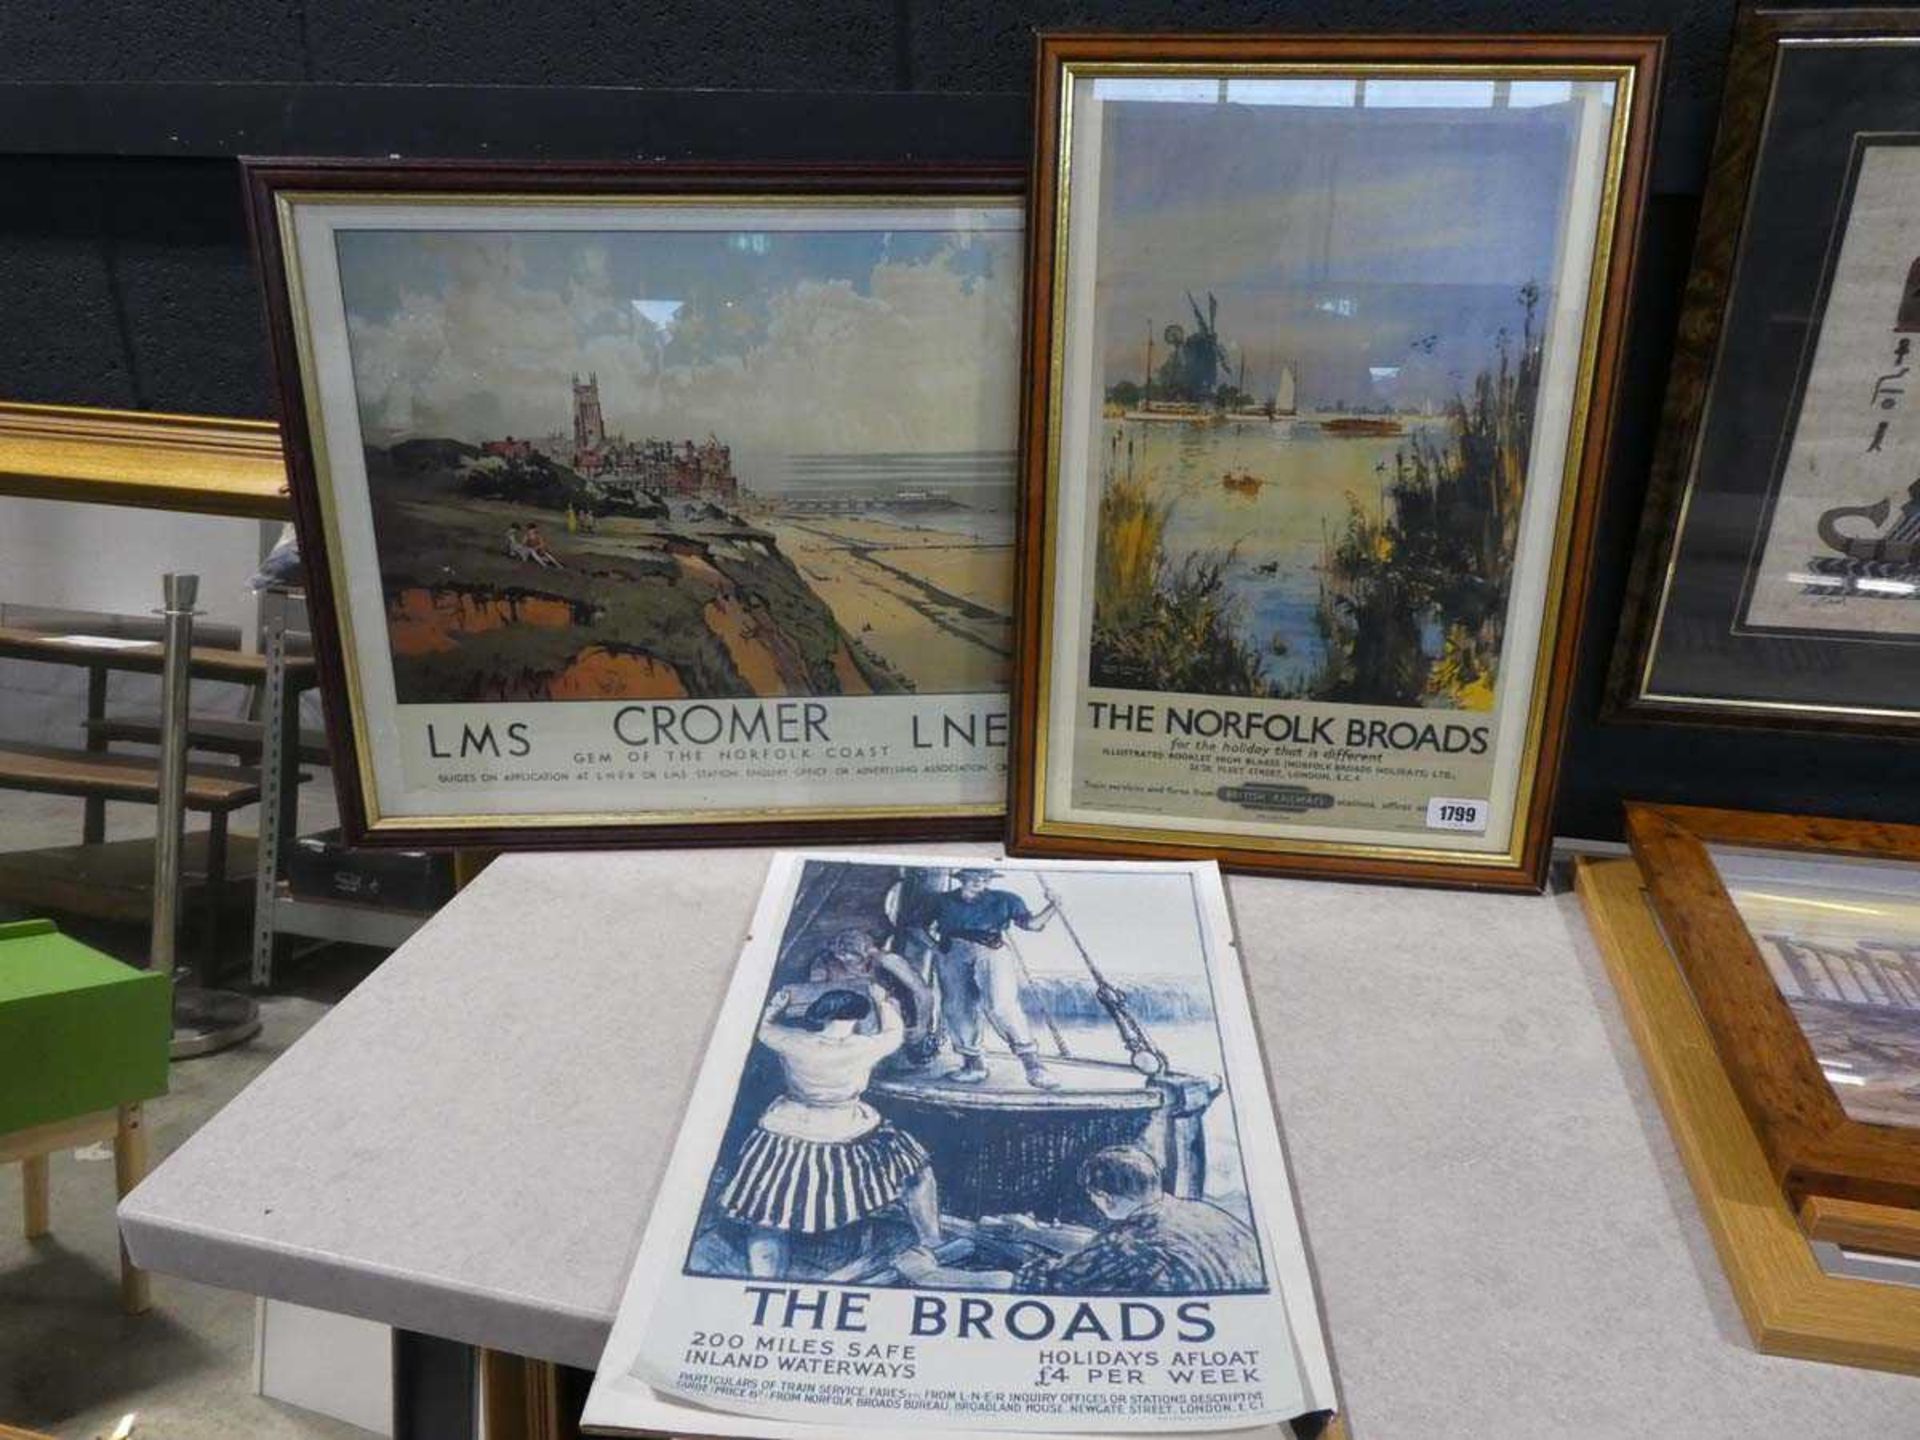 Reproduction LNER posters; Cromer, The Broads and the Norfolk Broads